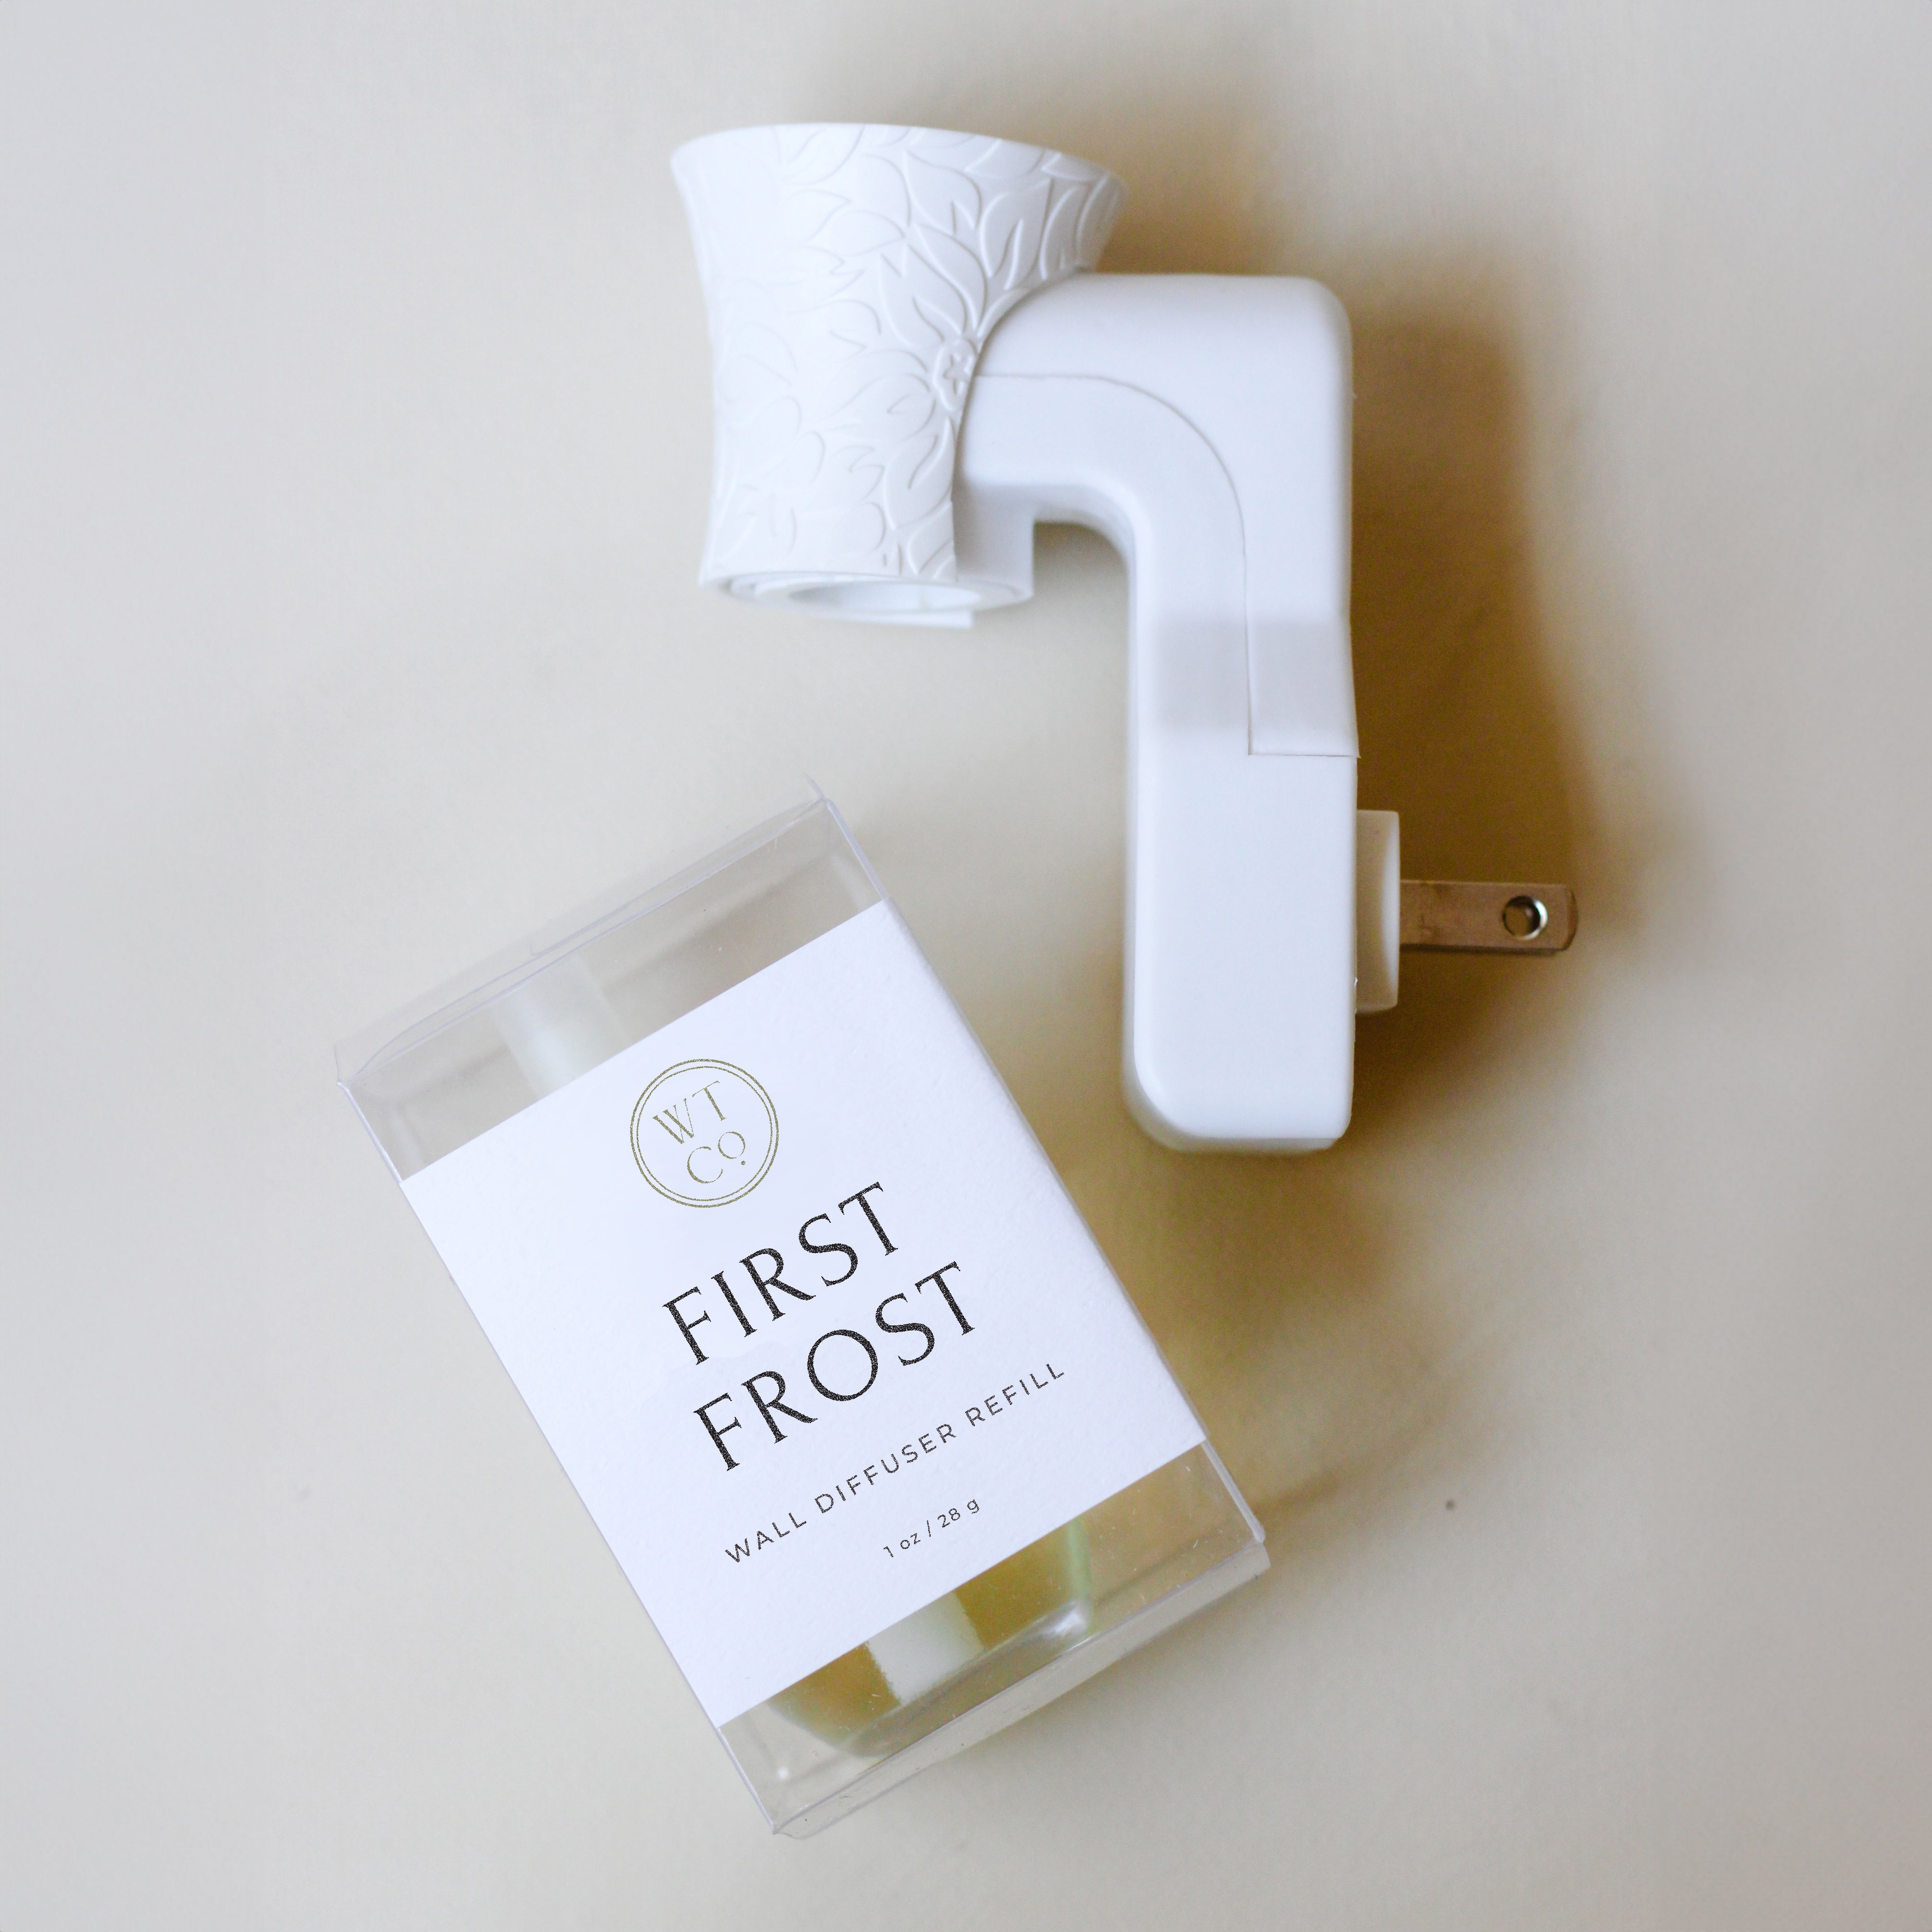 First Frost Wall Diffuser Refill | Well-Taylored Co.